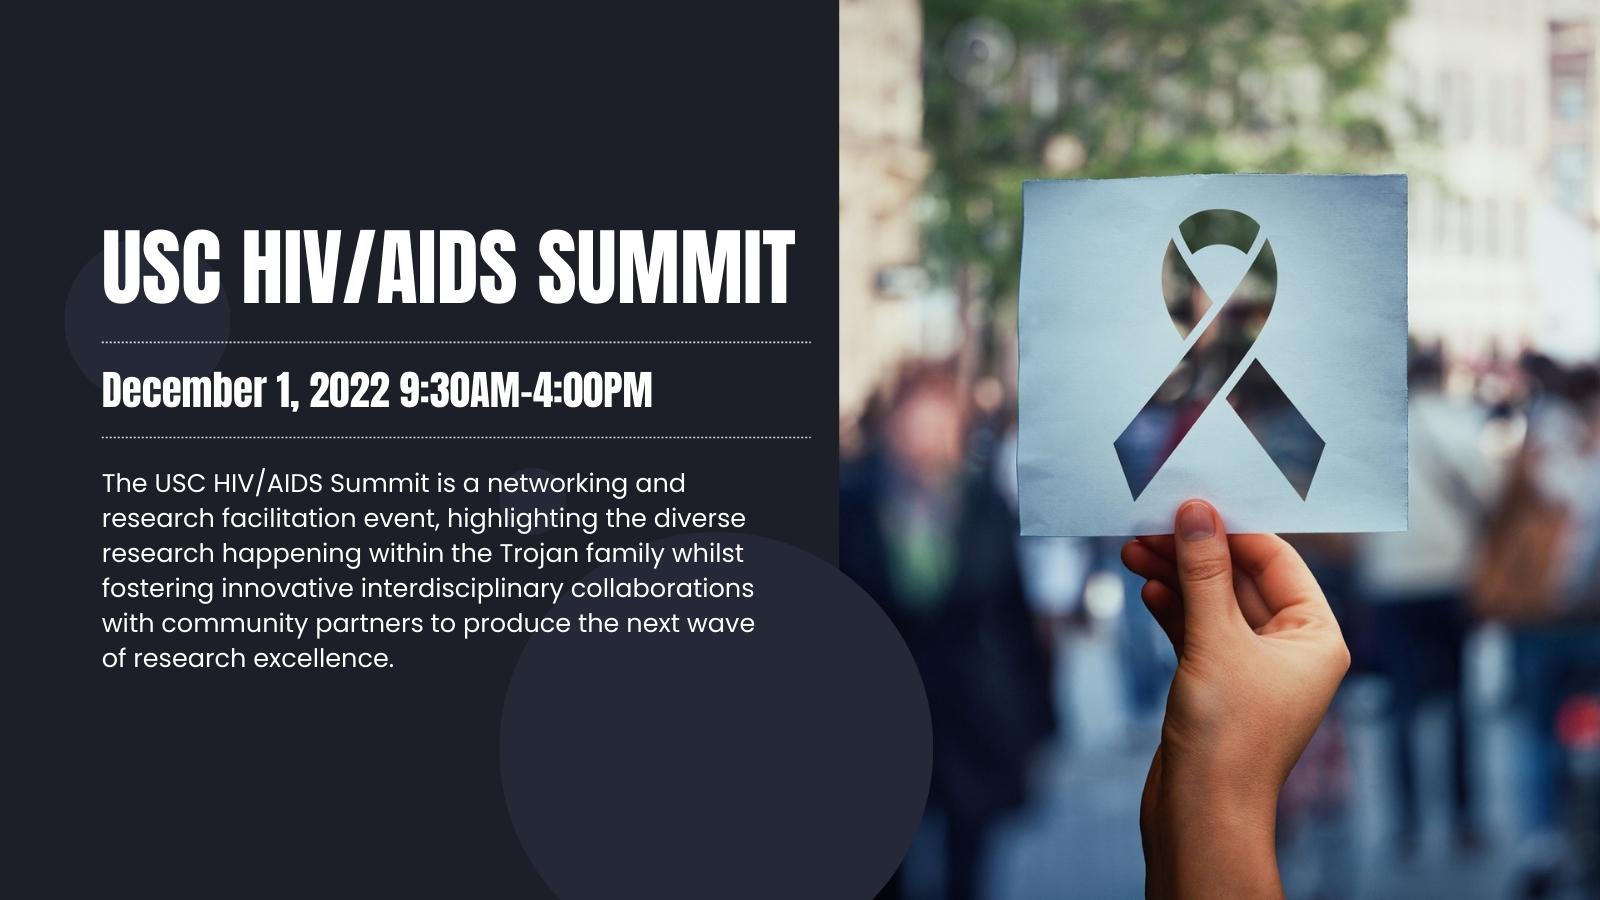 Flyer for USC HIV/AIDS Summit with image of hand holding up the ribbon symbolizing those living with HIV